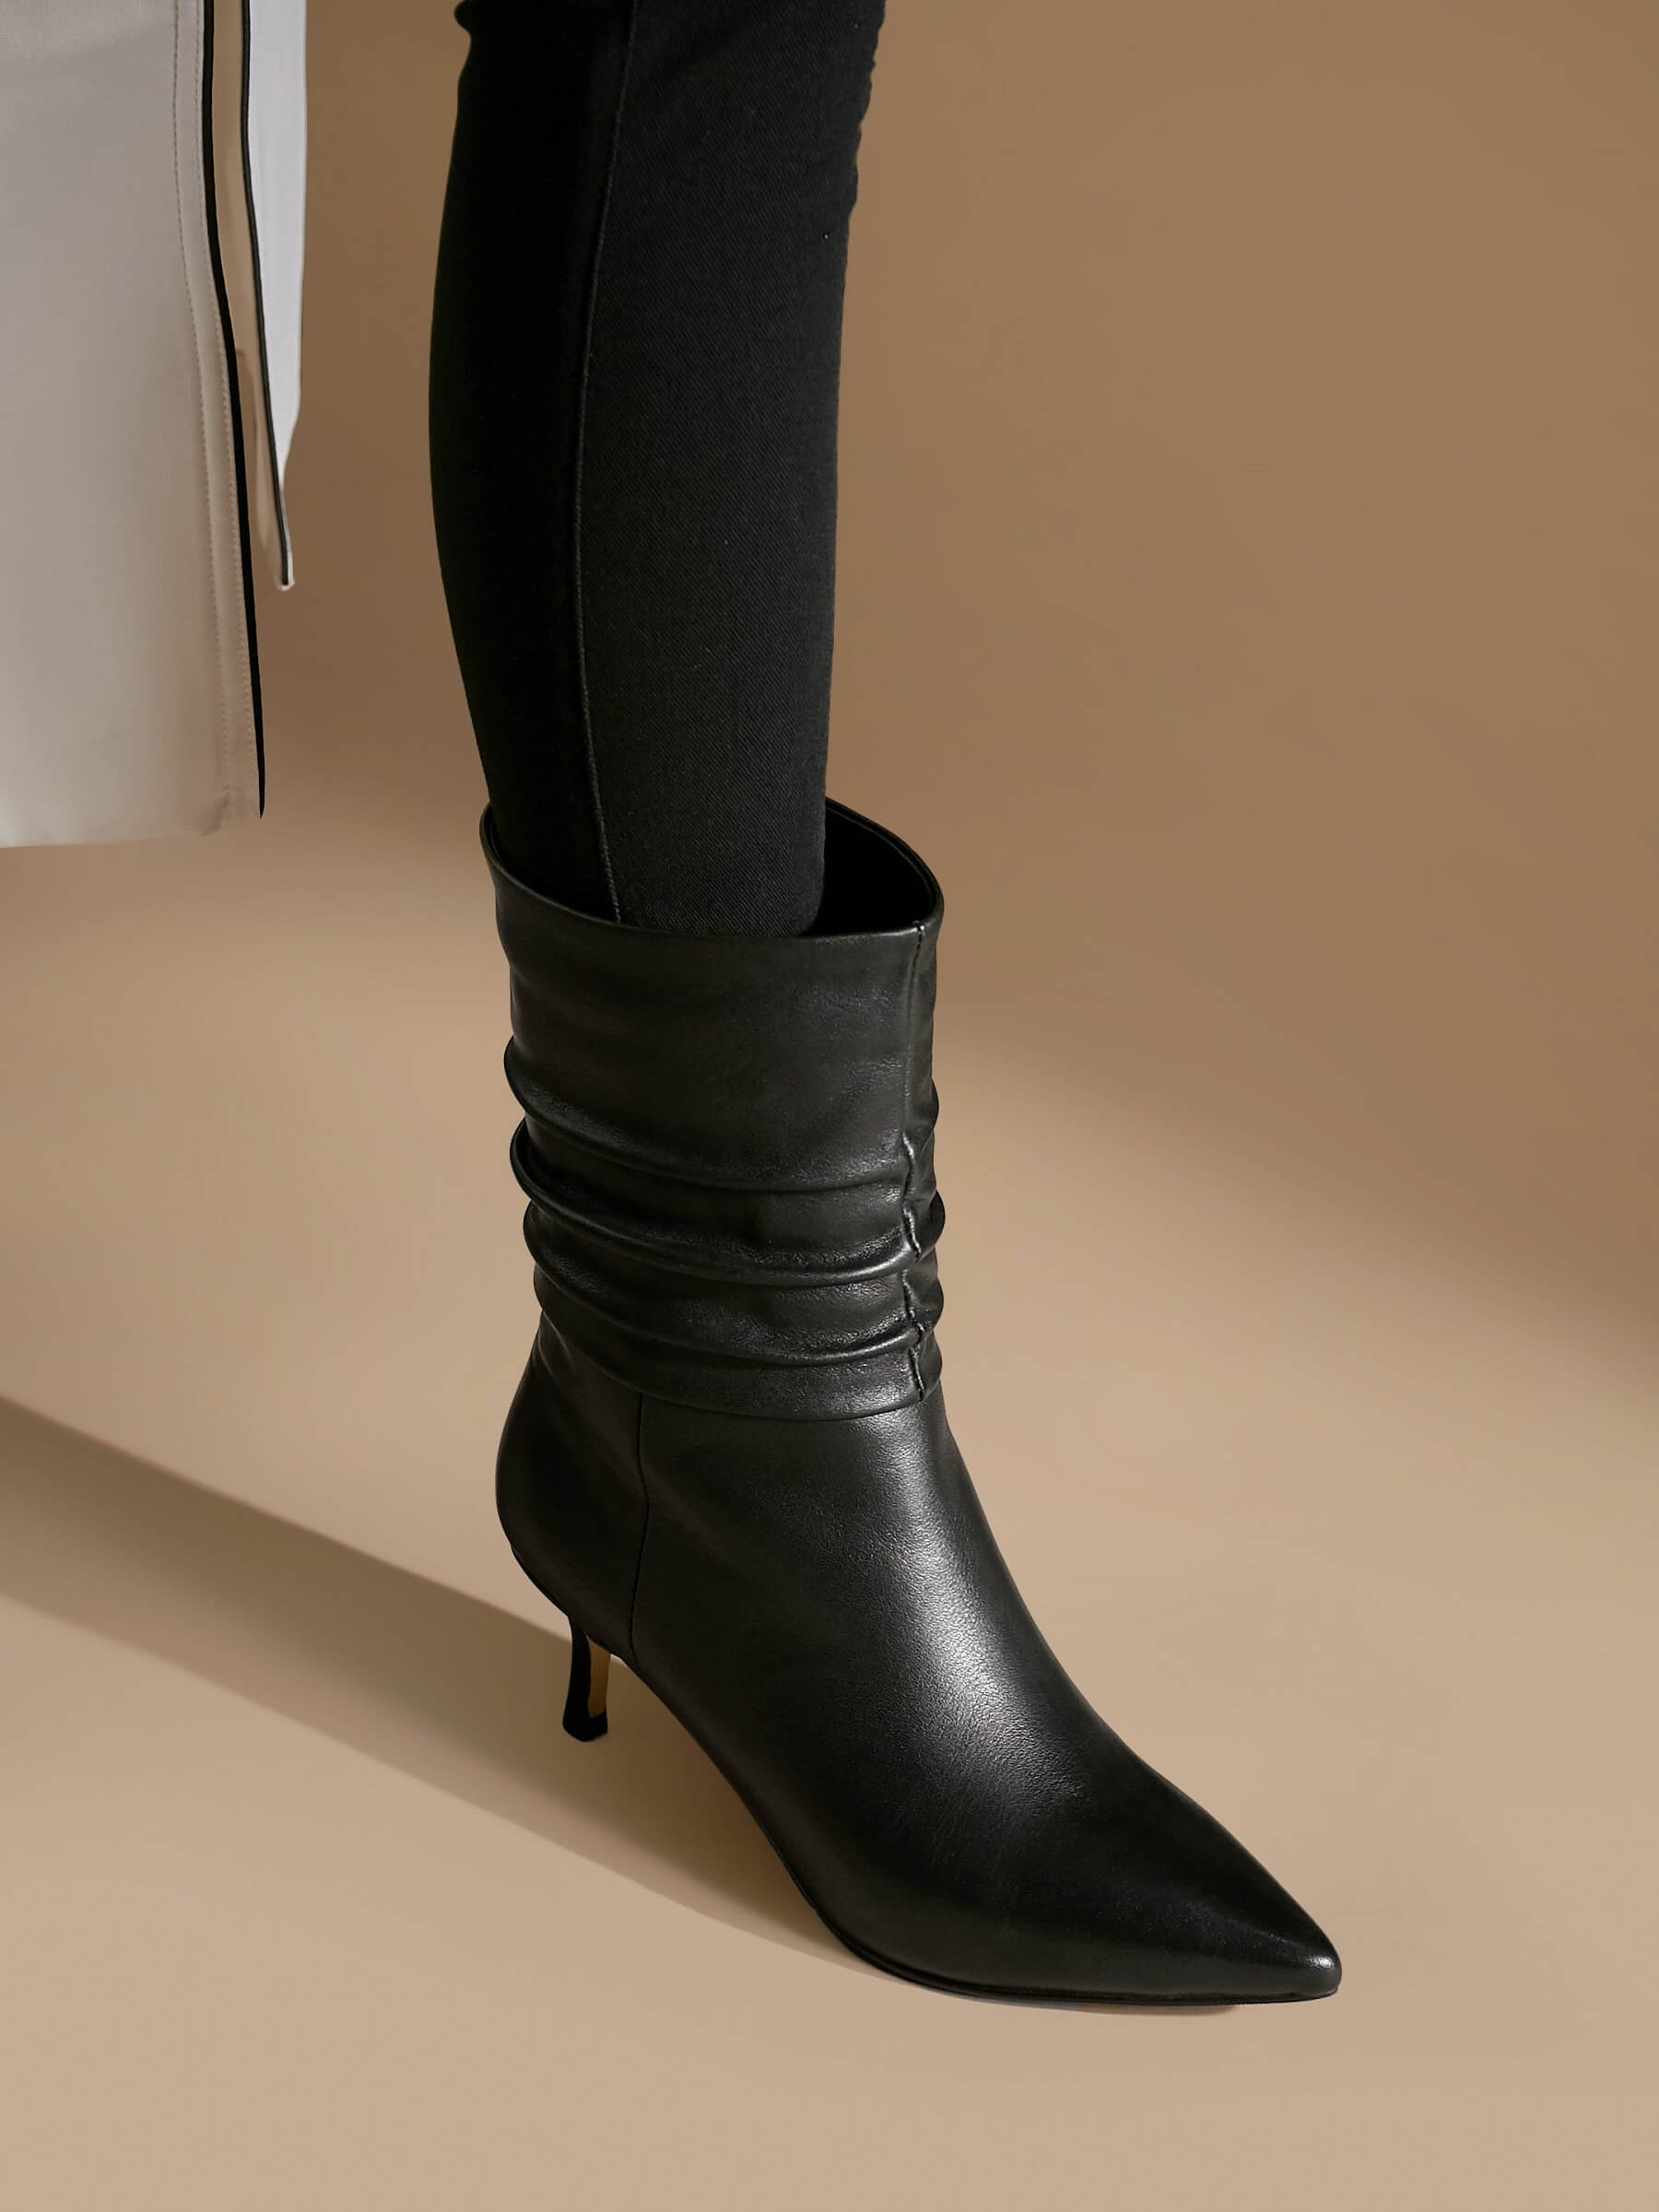 ROLISA-Milo-Slouchy-Ruched-Leather-Kitten-Heels-Mid-Calf-Boots-Black-Model